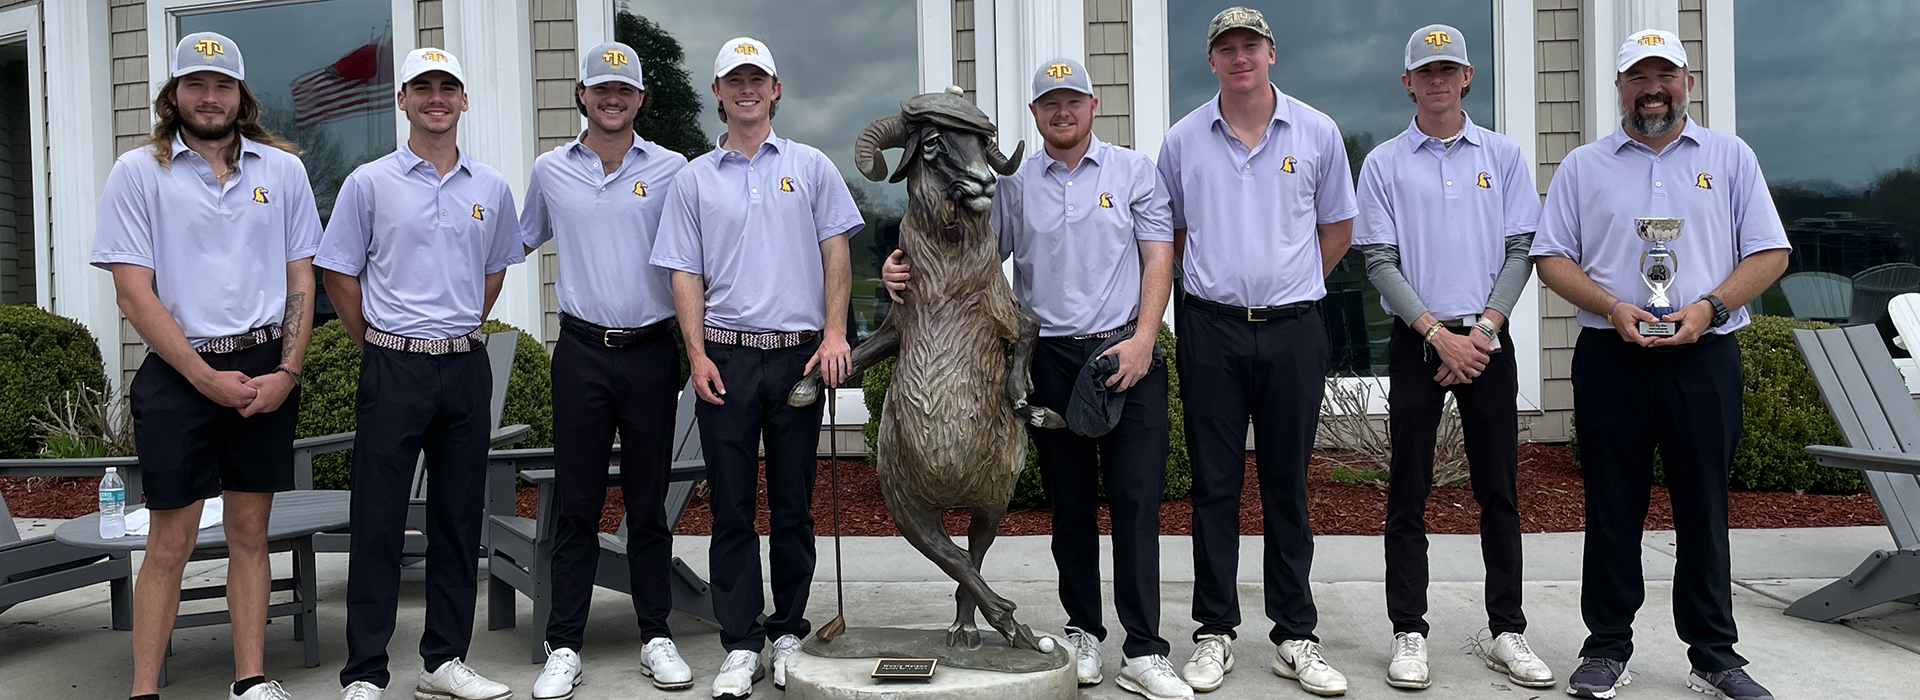 Tech closes out regular season with runner-up finish at Big Blue Intercollegiate